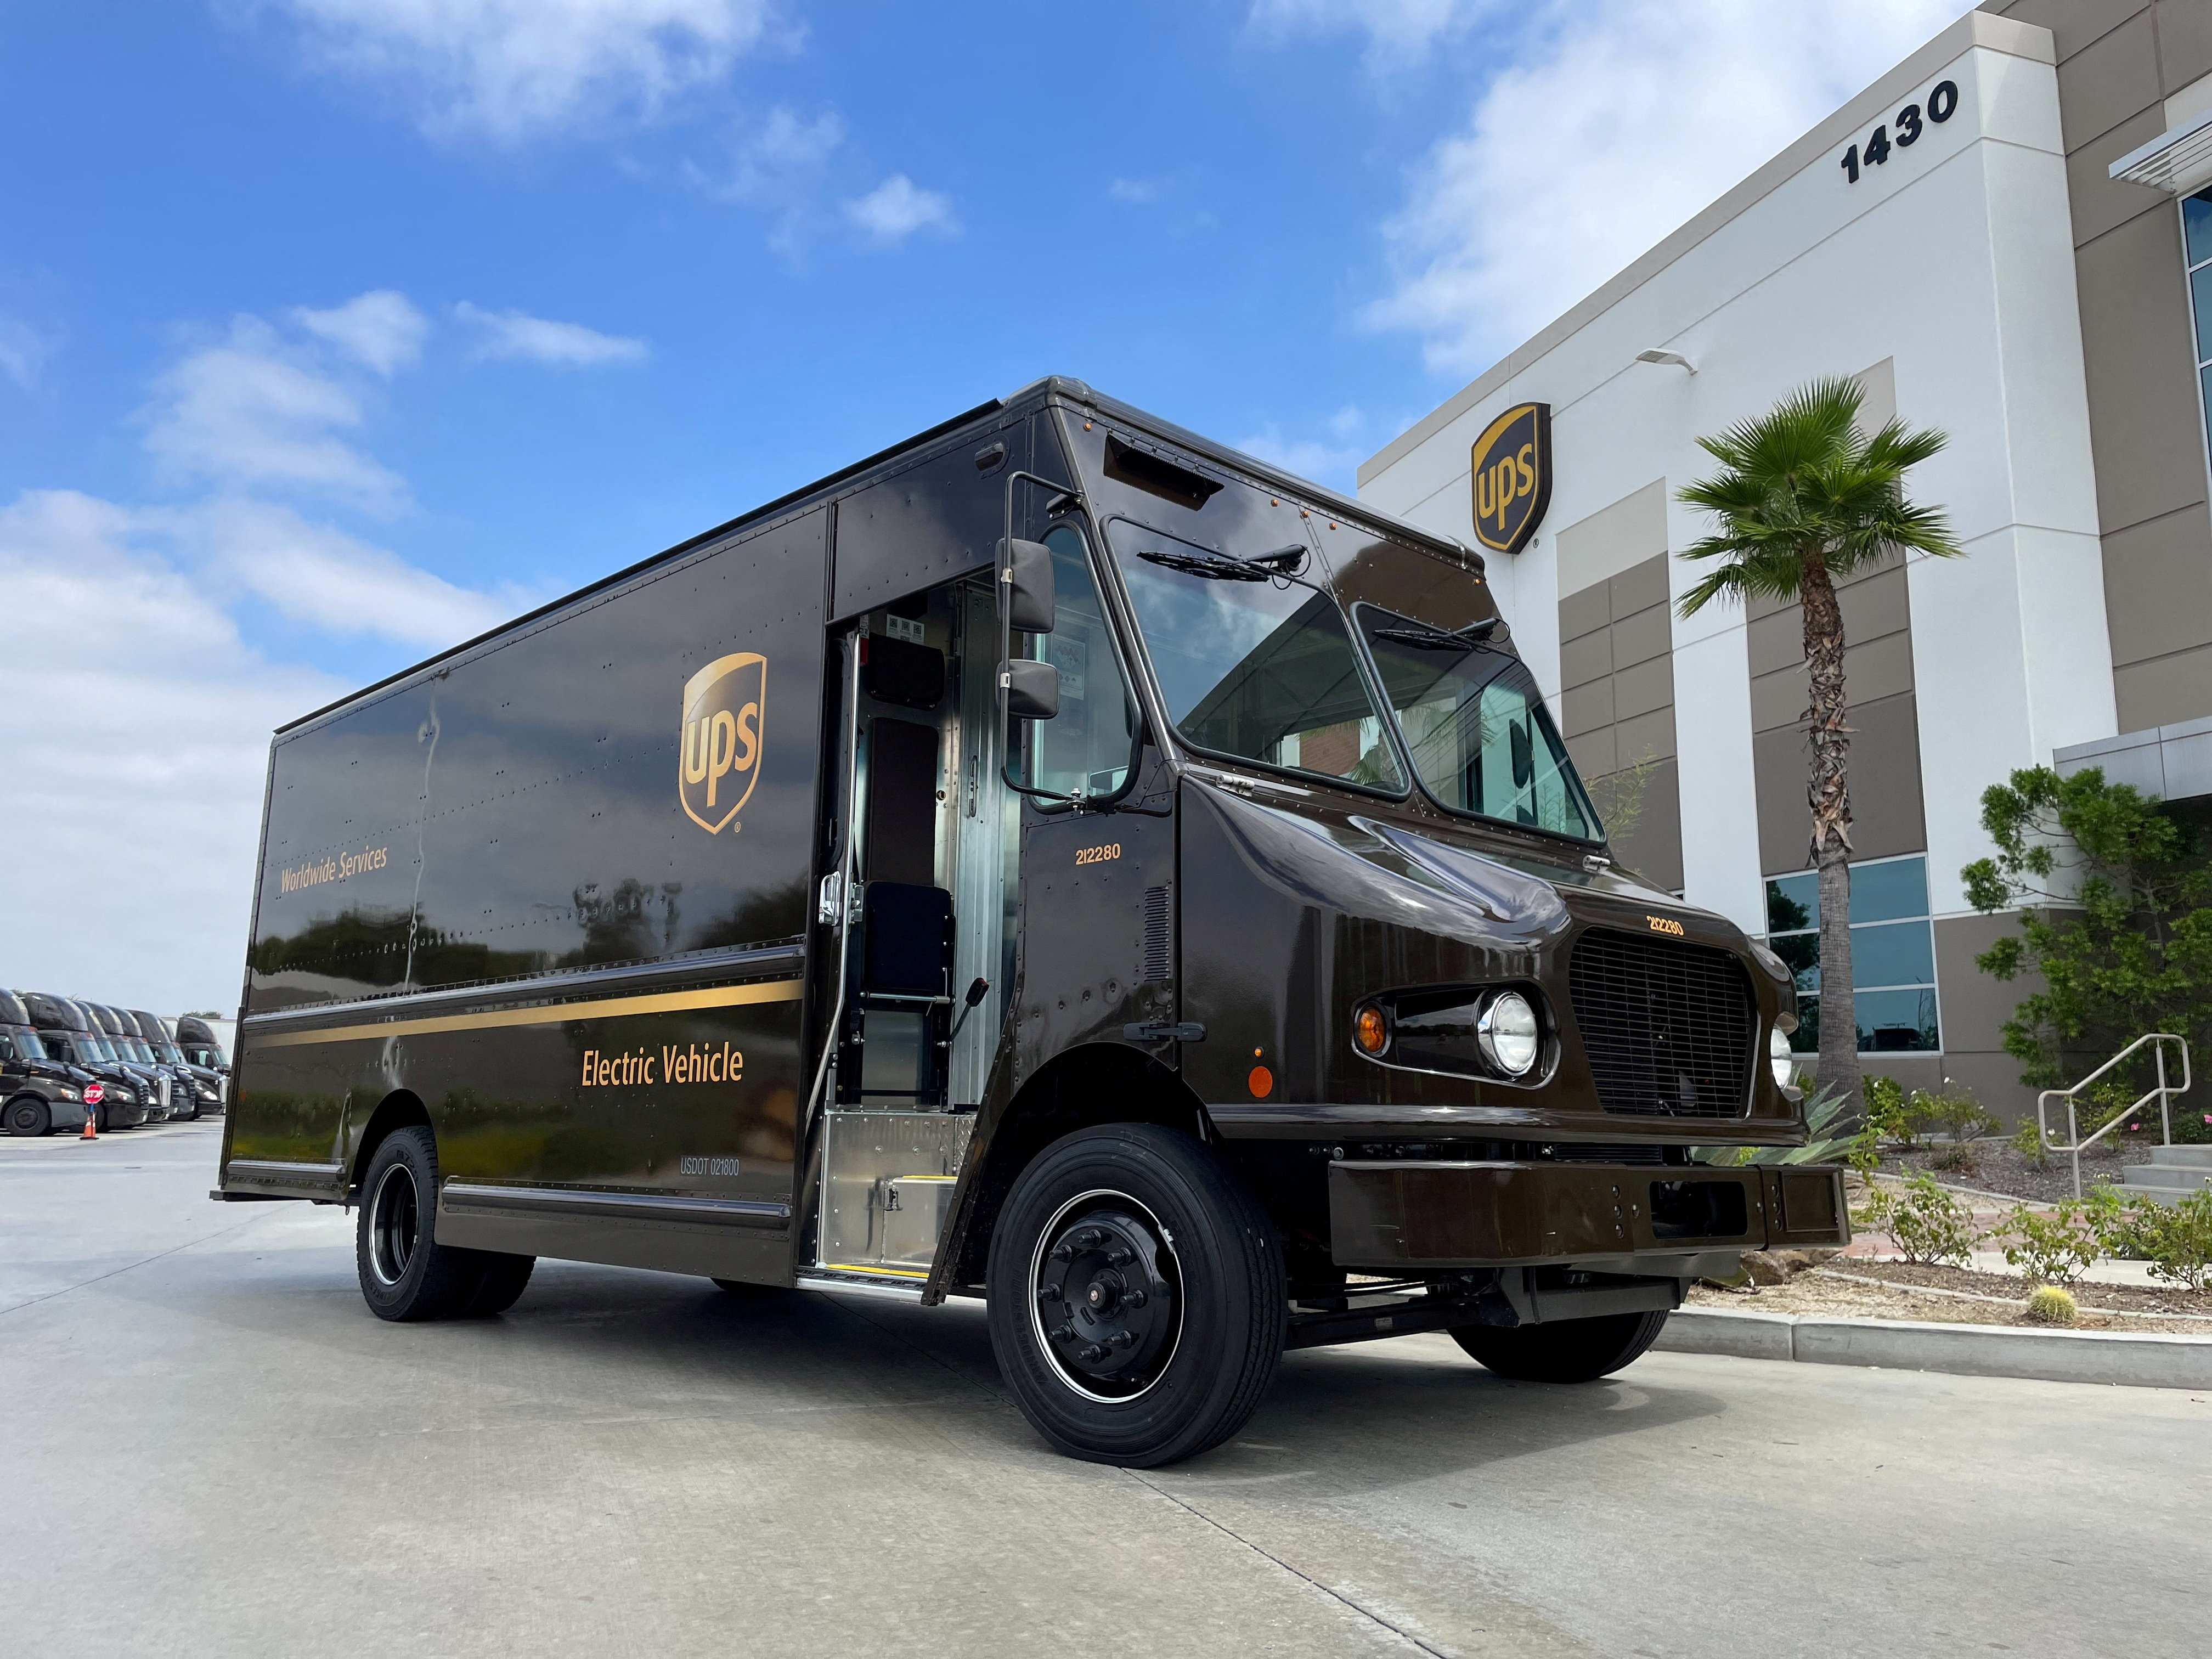 United Parcel Service's (UPS) newly launched electric delivery truck is seen in Compton